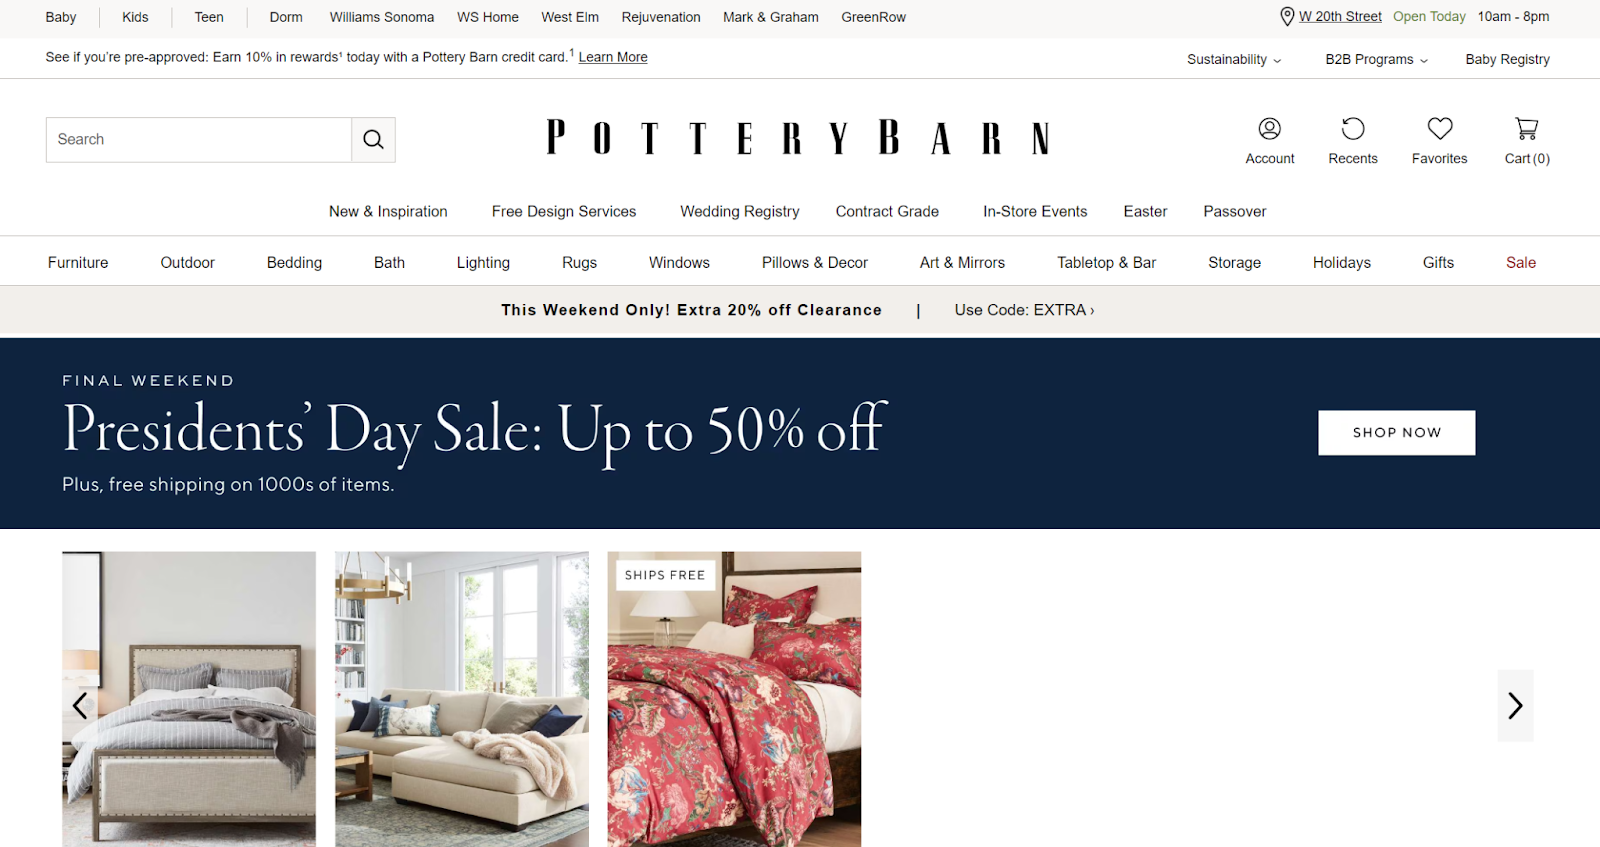 Pottery Barn home page